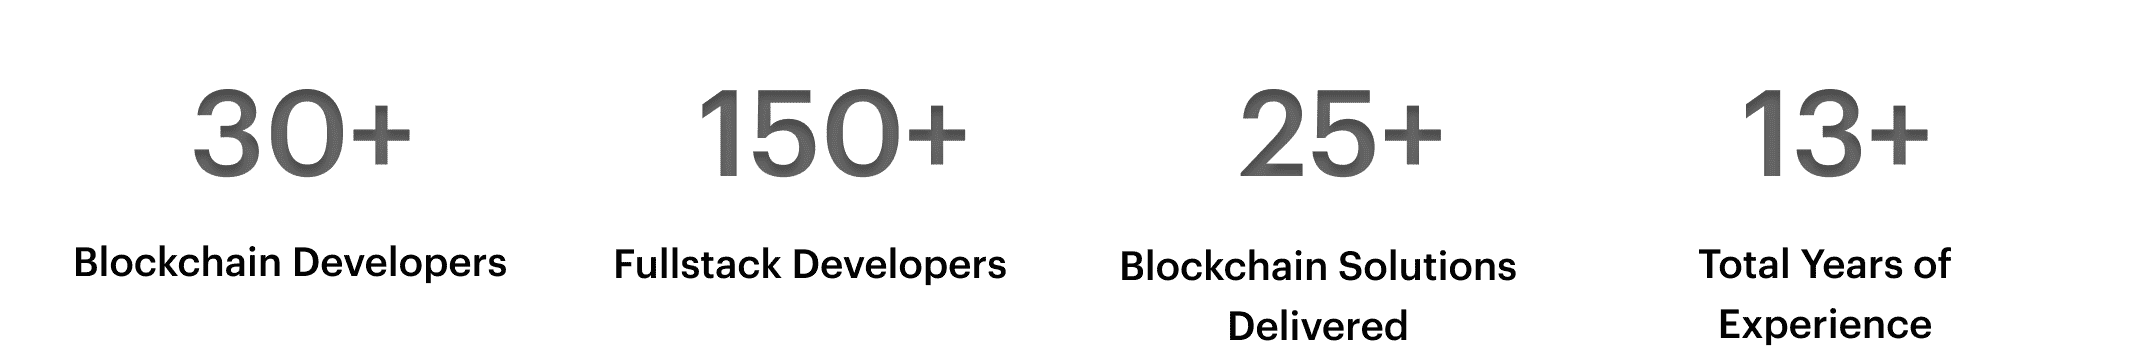 dApps-numbers